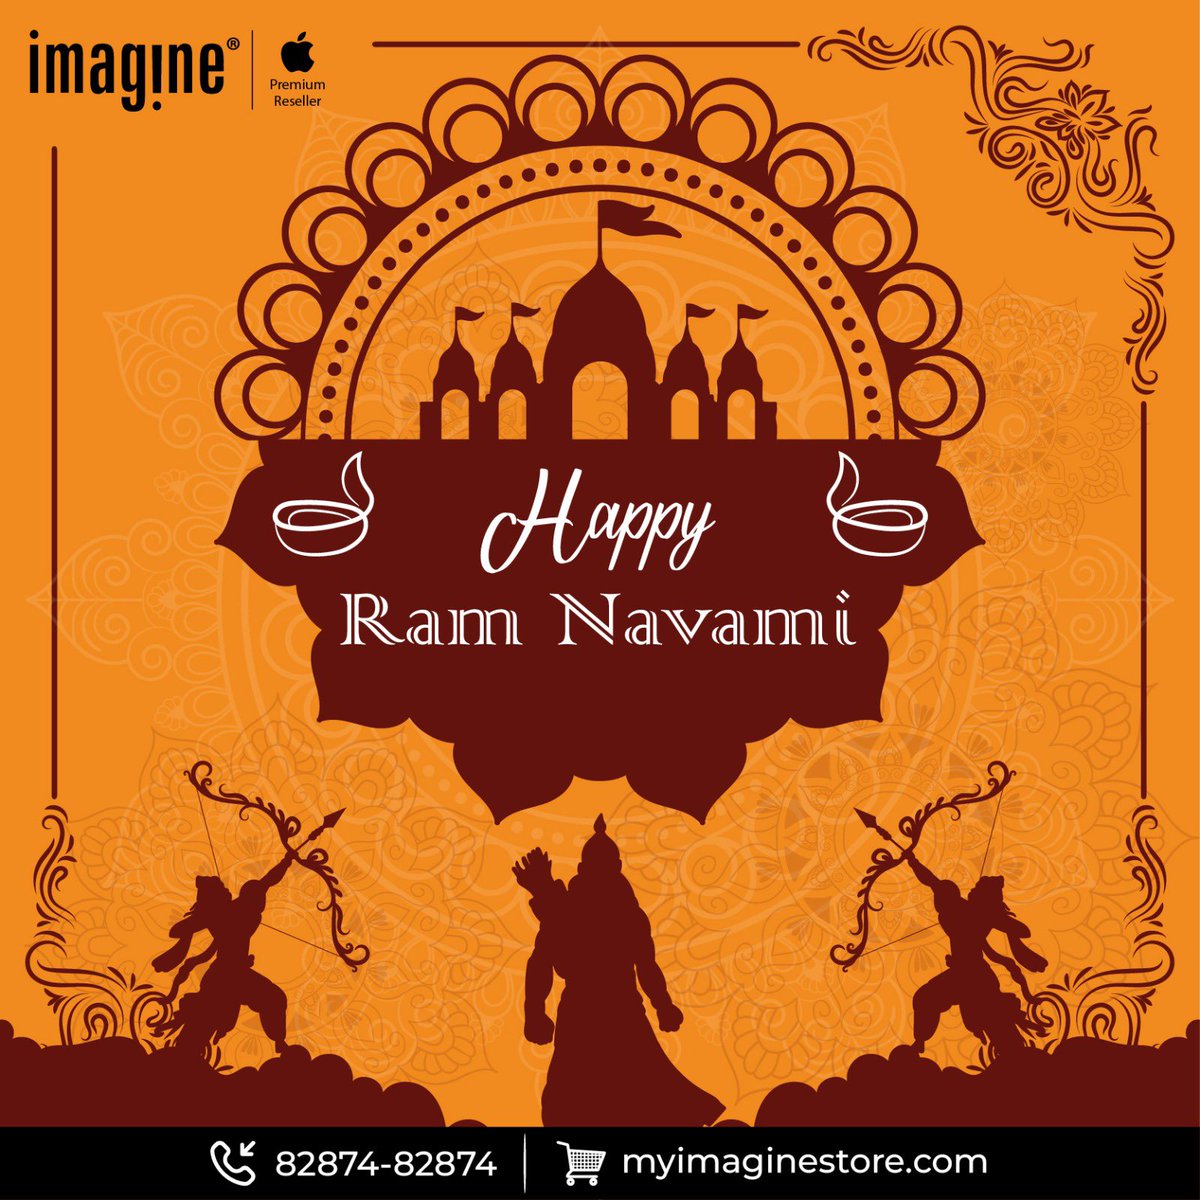 May Lord Rama's blessings fill your life with joy and prosperity. Happy Ram Navami from Imagine! #Apple #Tresor #Imagine #Festival #RamNavami #Wishes